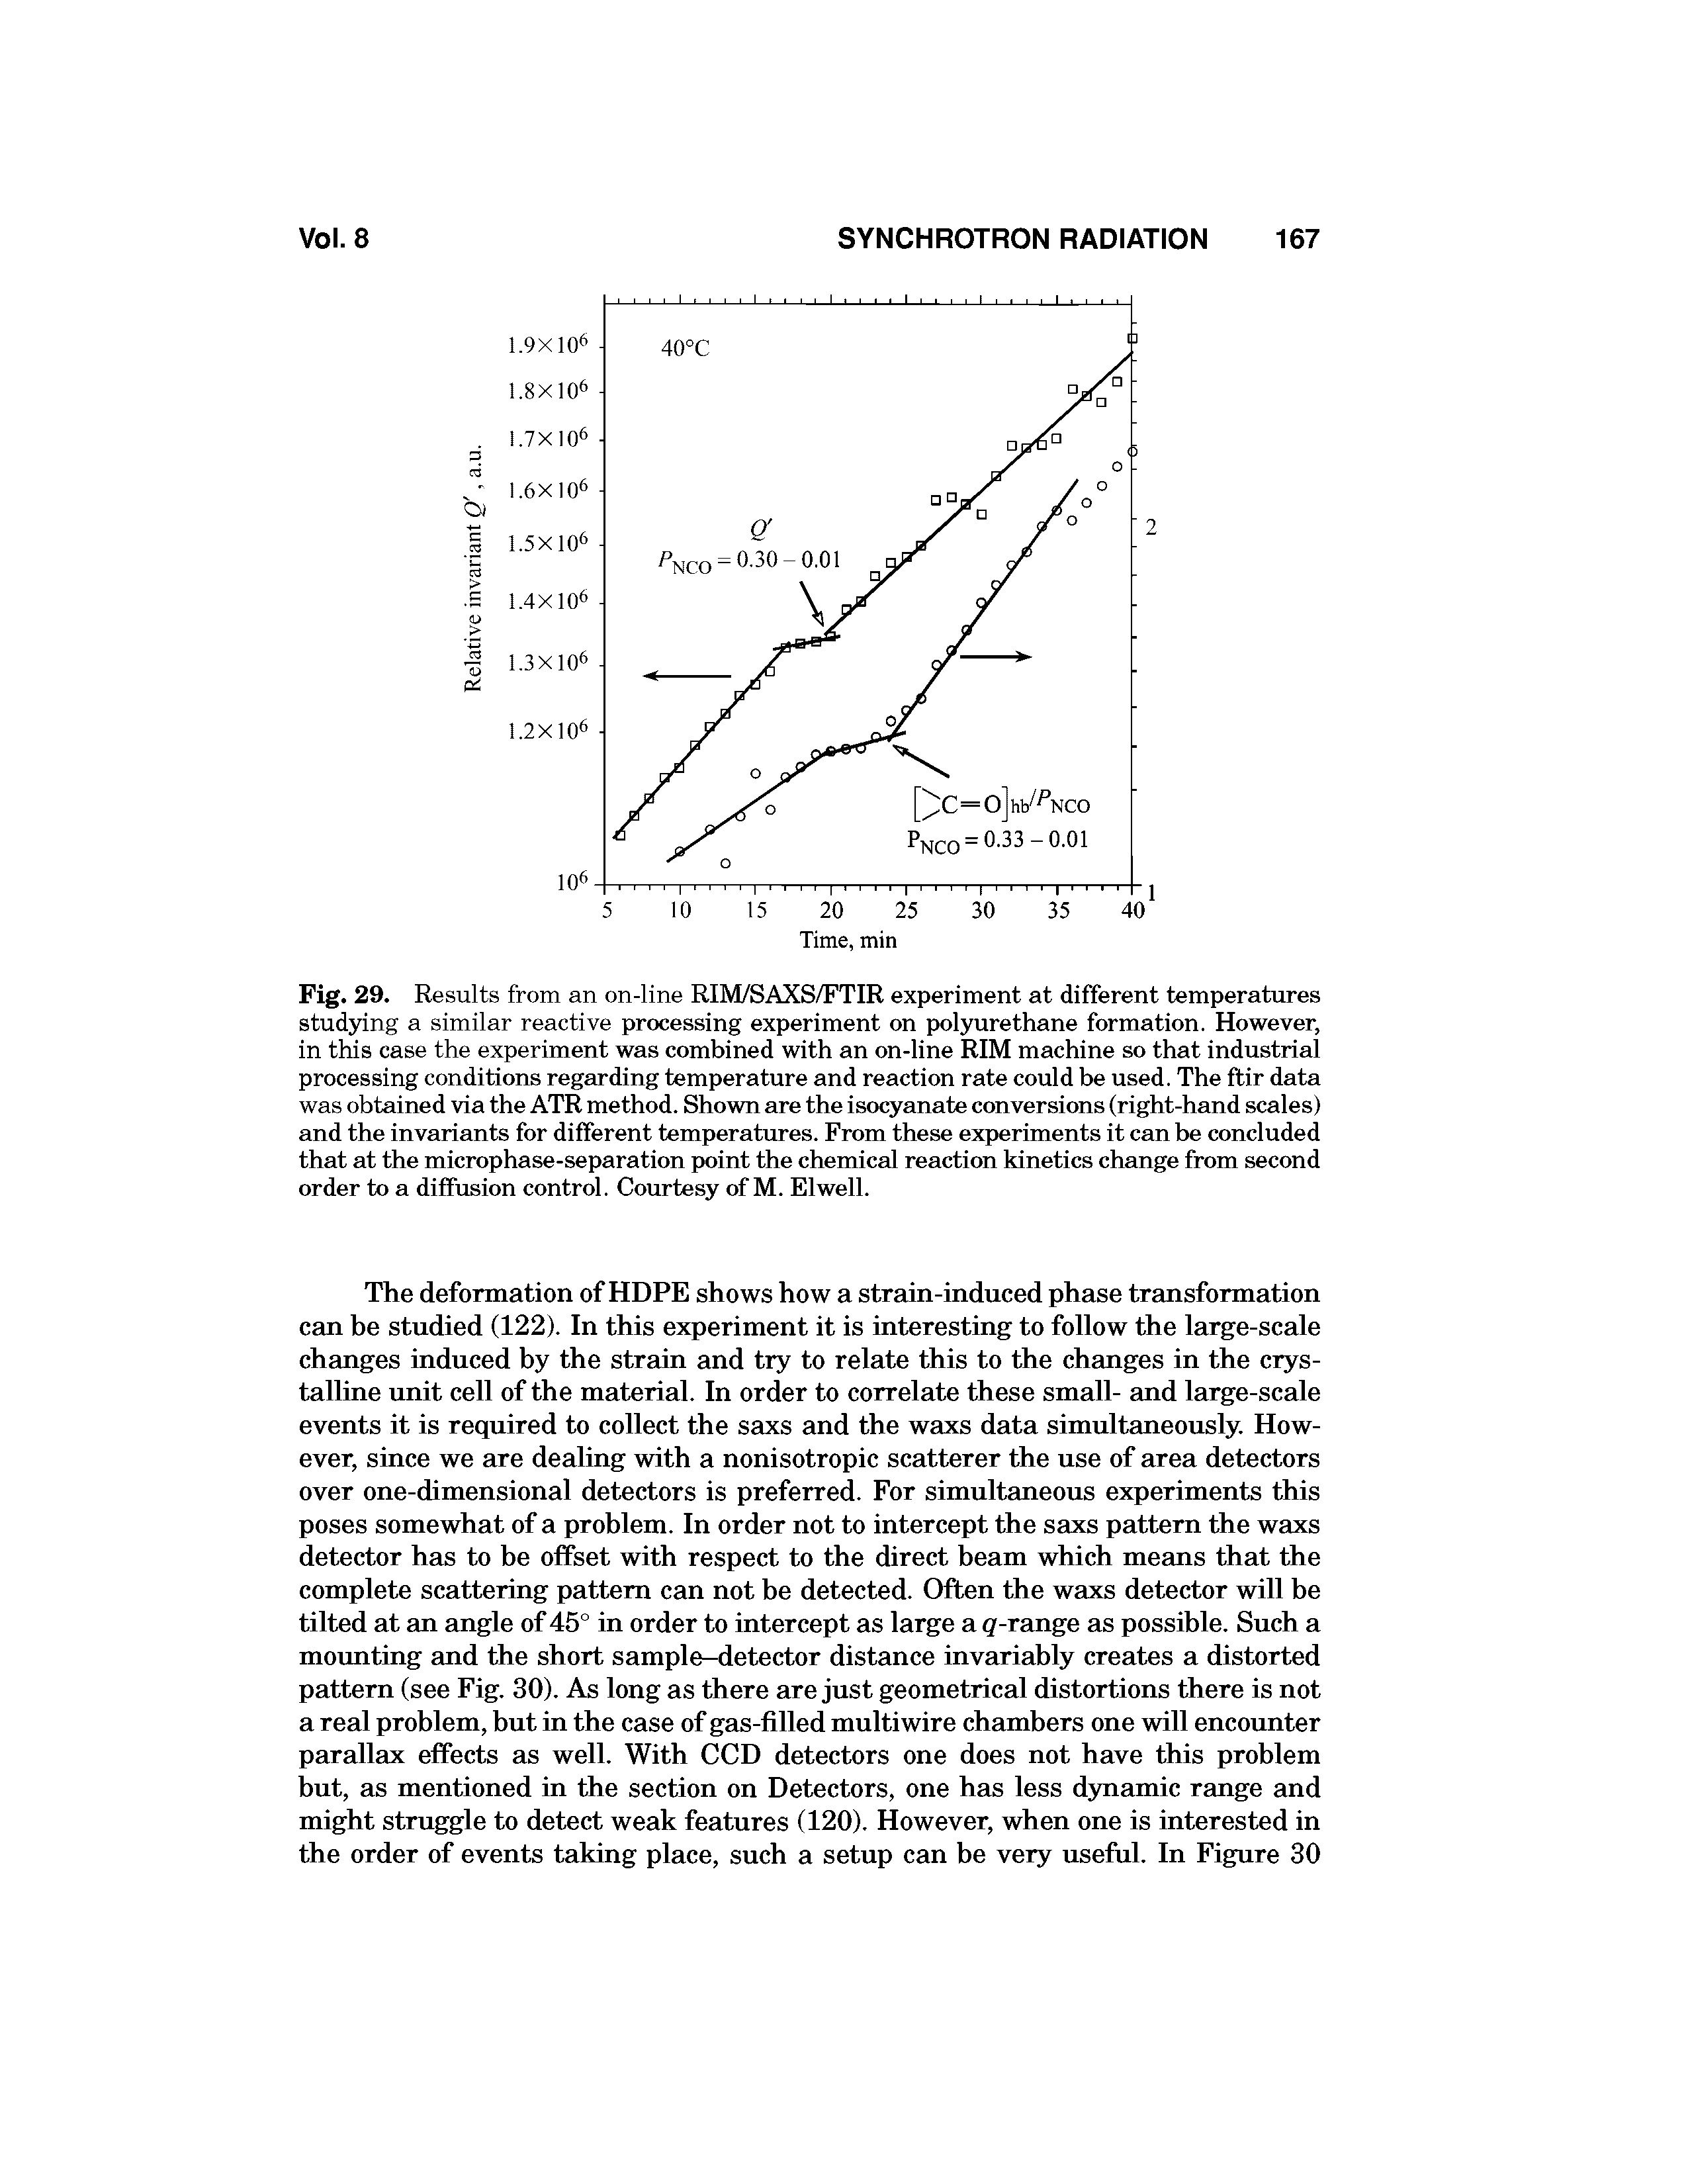 Fig. 29. Results from an on-line RIM/SAXS/FTIR experiment at different temperatures studying a similar reactive processing experiment on polyurethane formation. However, in this case the experiment was combined with an on-line RIM machine so that industrial processing conditions regarding temperature and reaction rate could be used. The ftir data was obtained via the ATR method. Shown are the isocyanate conversions (right-hand scales) and the invariants for different temperatures. From these experiments it can be concluded that at the microphase-separation point the chemical reaction kinetics change from second order to a diffusion control. Courtesy of M. Elwell.